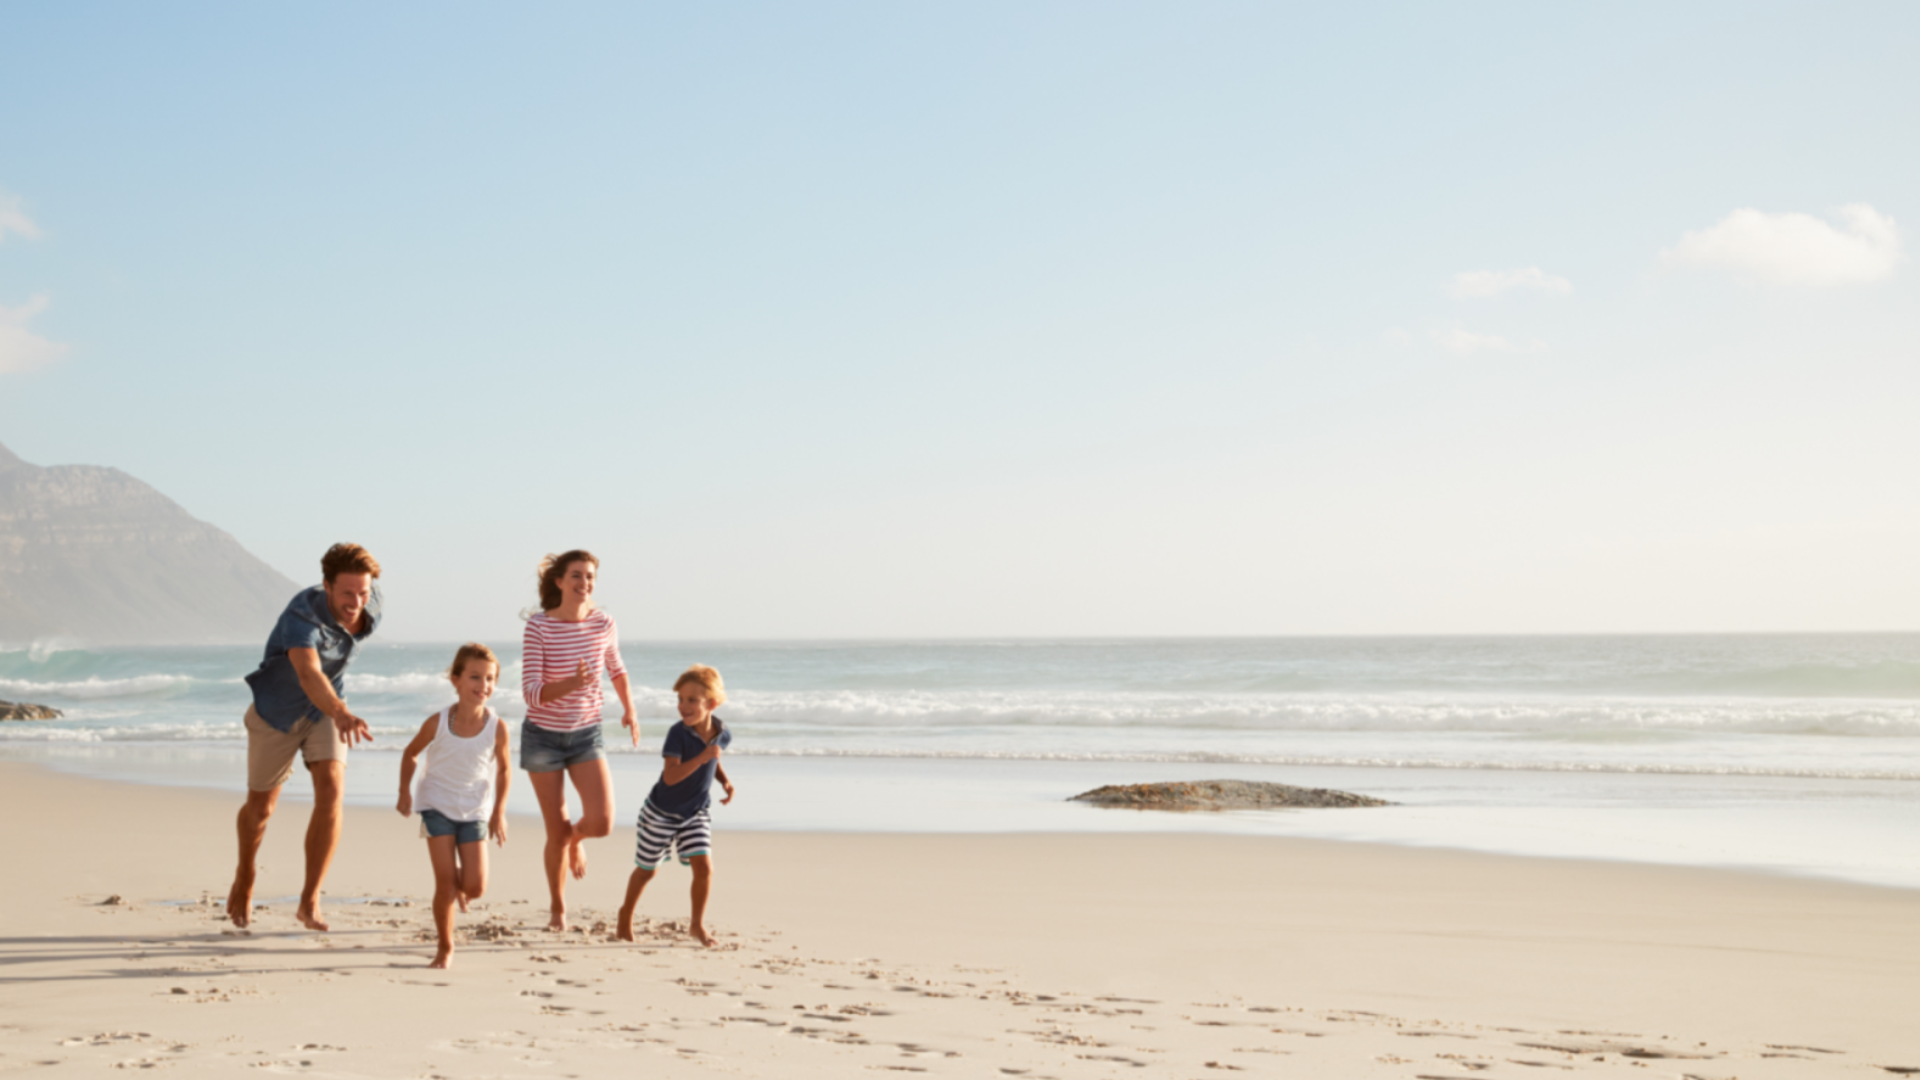 A portrait of the family running on the beach 